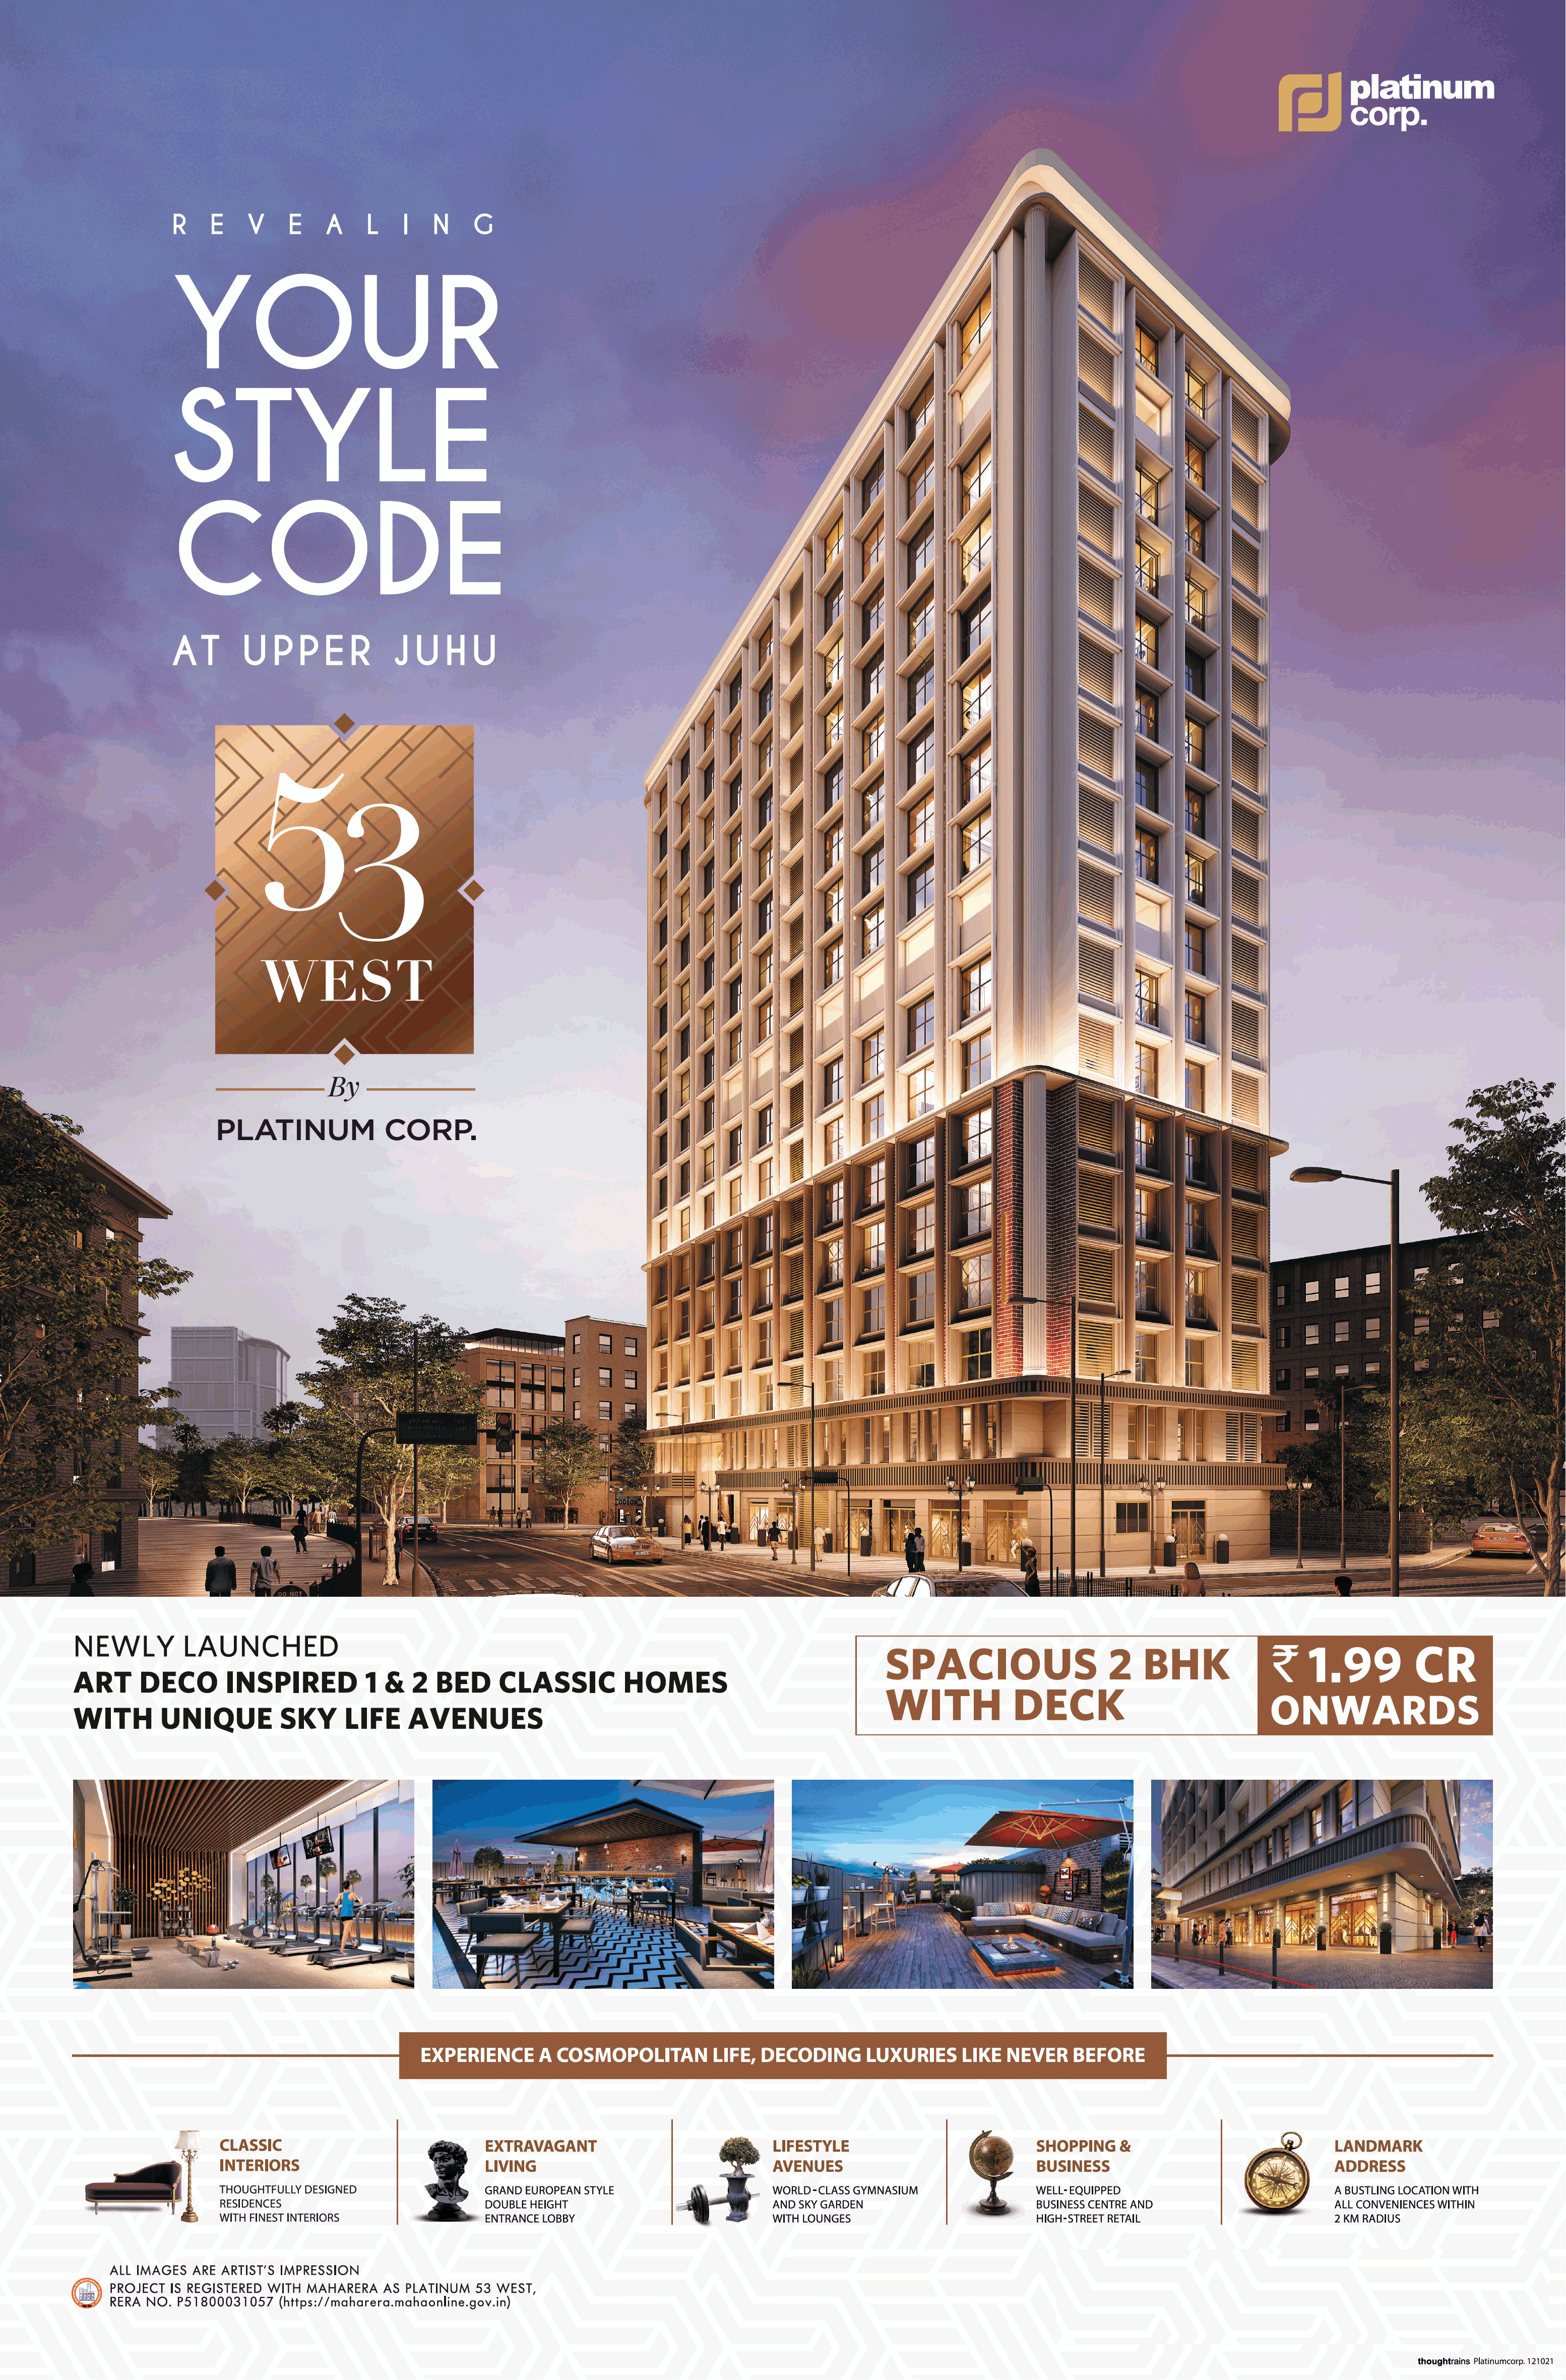 Newly launched art deco inspired 1 & 2 bed classic homes with unique sky life avenues at Platinum 53 West, Mumbai, Update